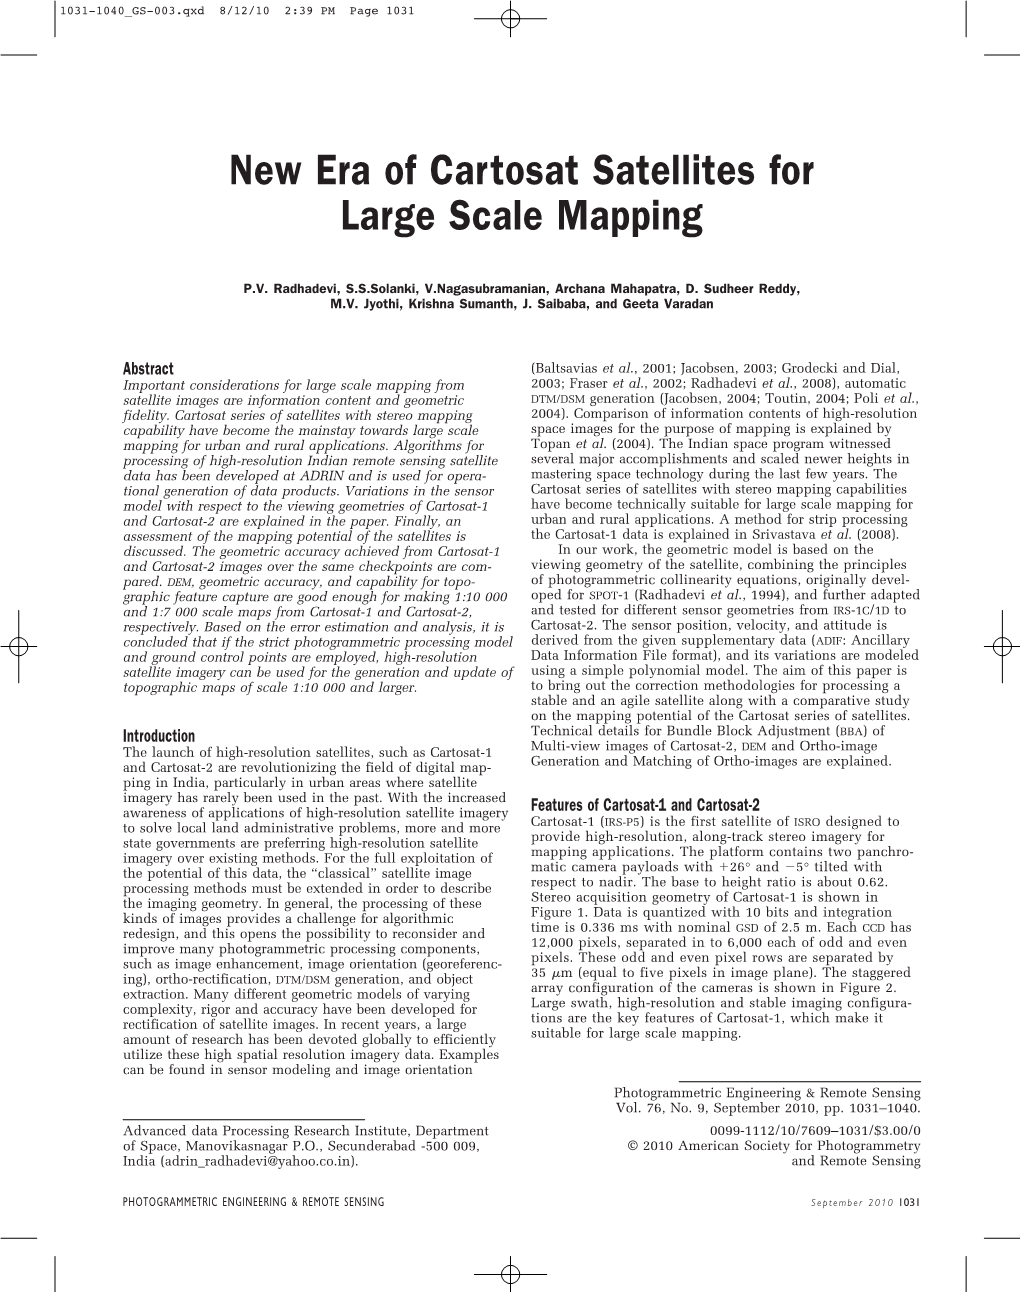 New Era of Cartosat Satellites for Large Scale Mapping